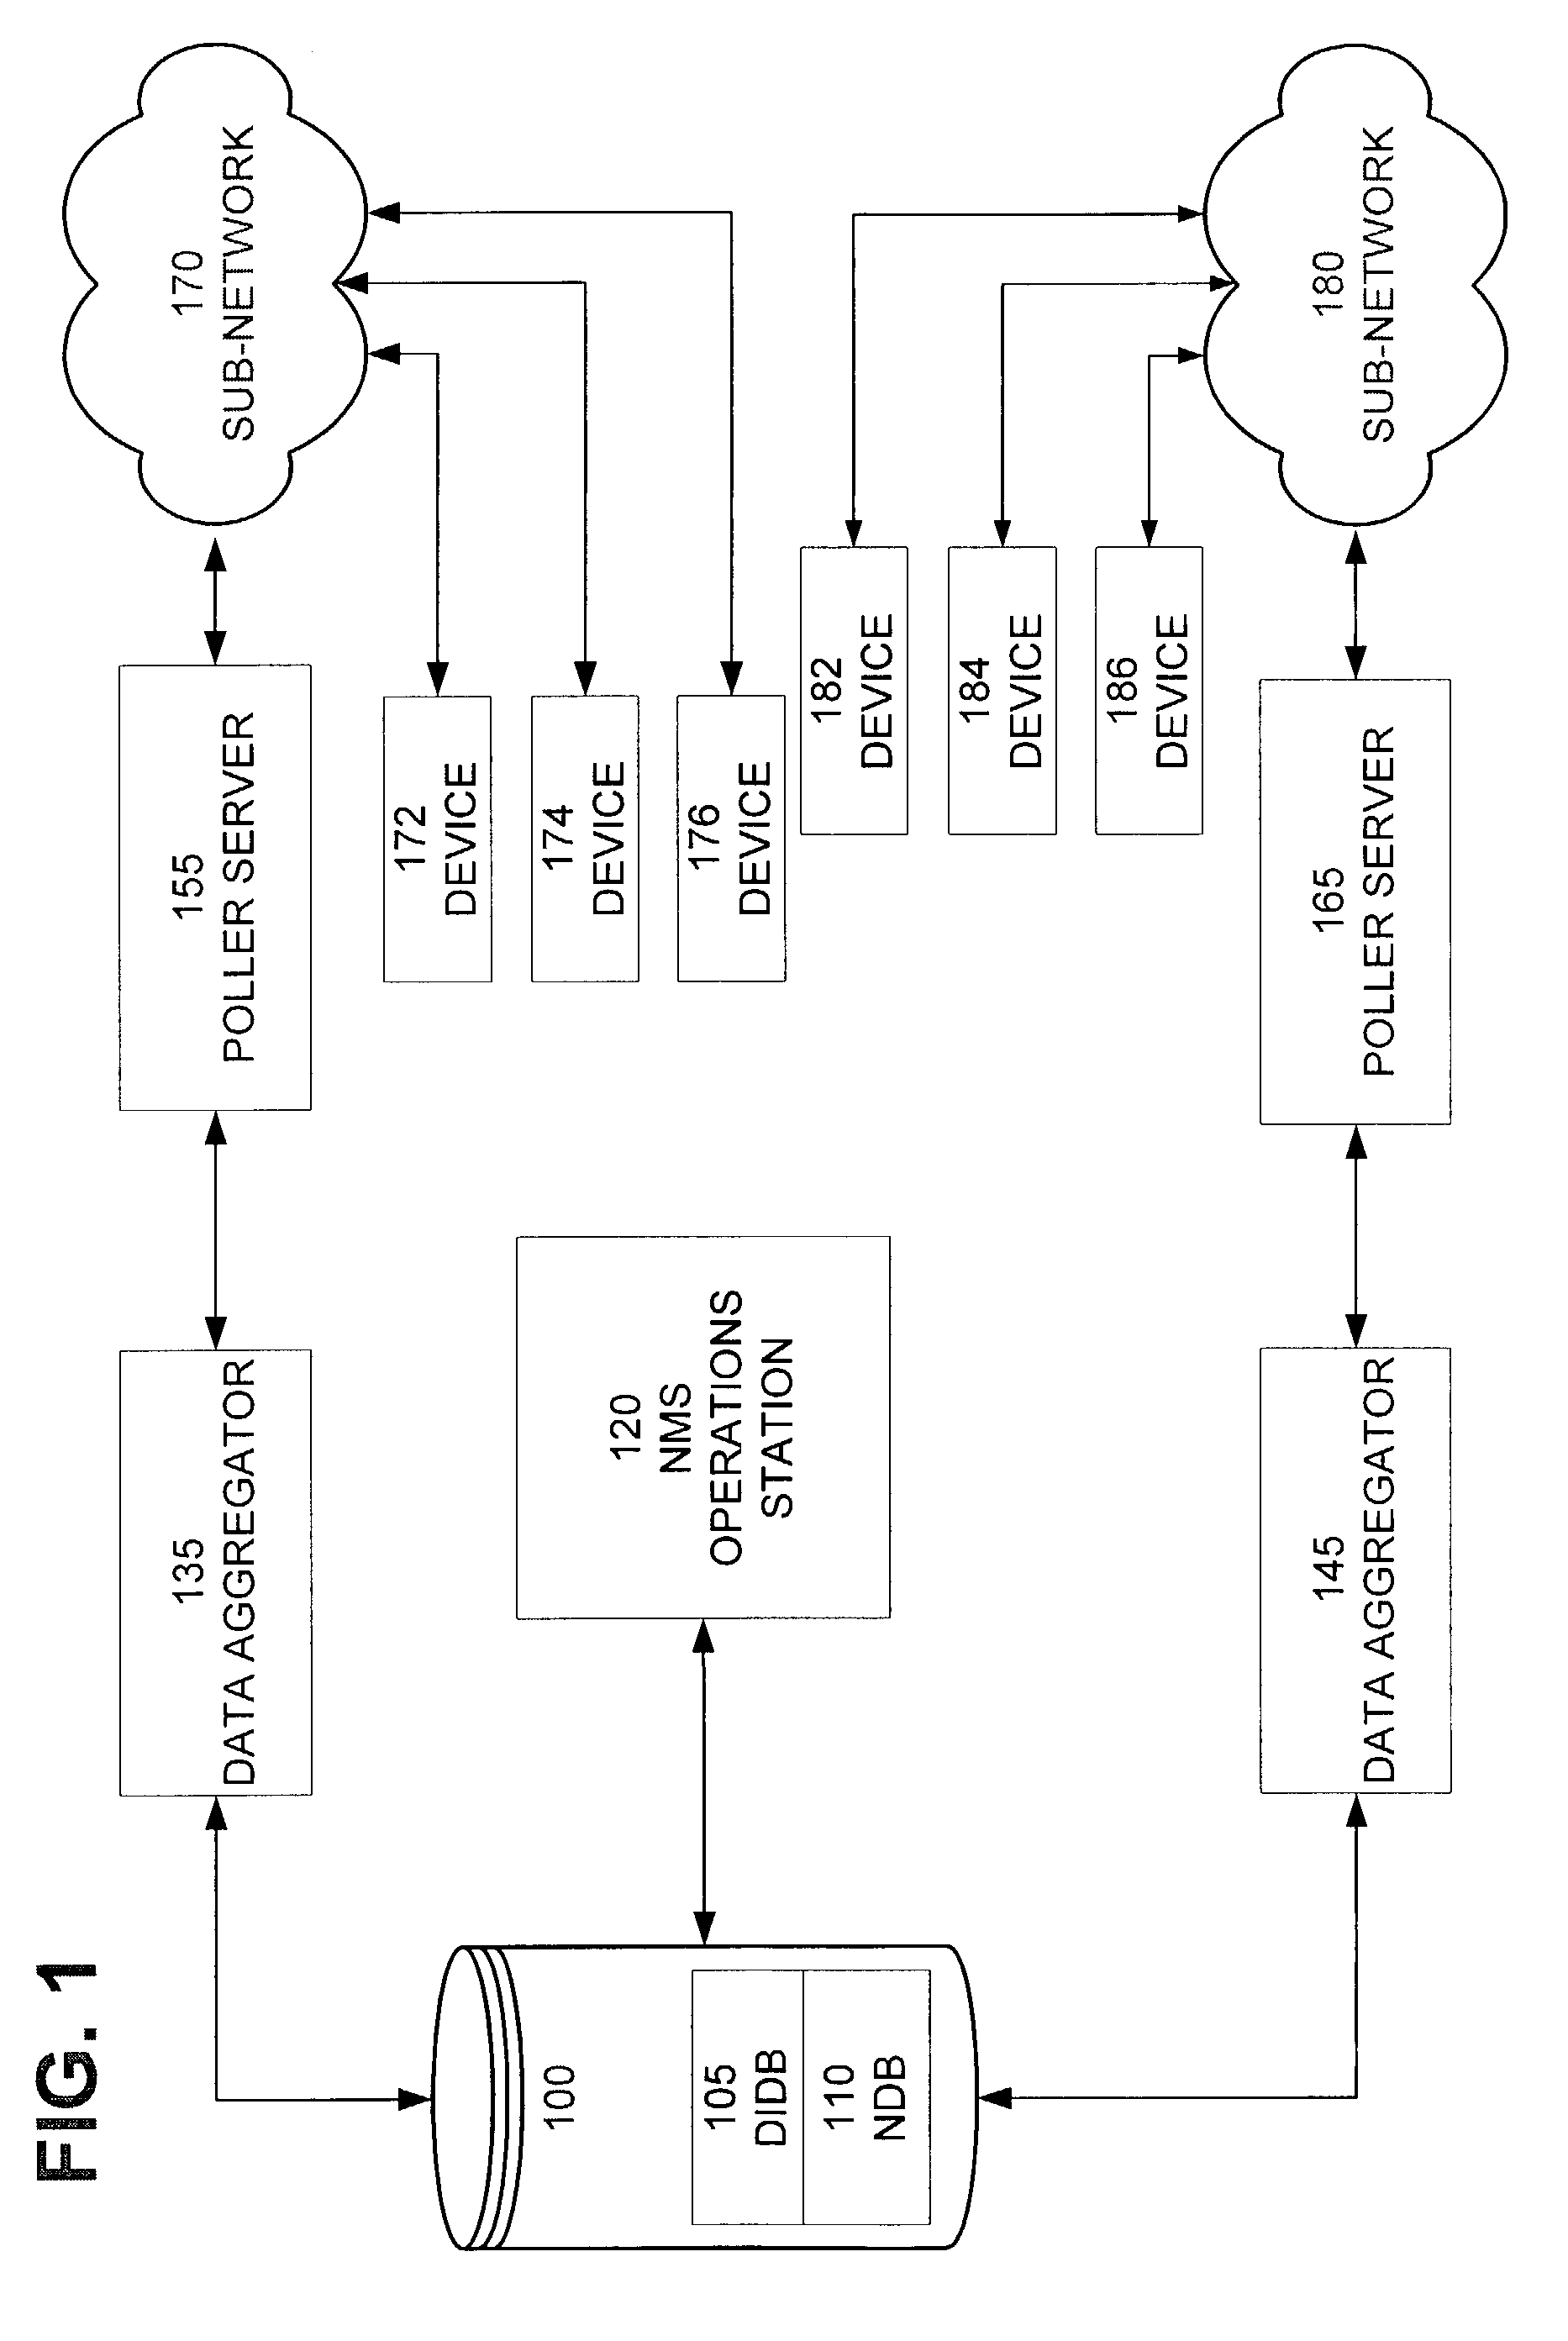 System and method for synchronizing the configuration of distributed network management applications